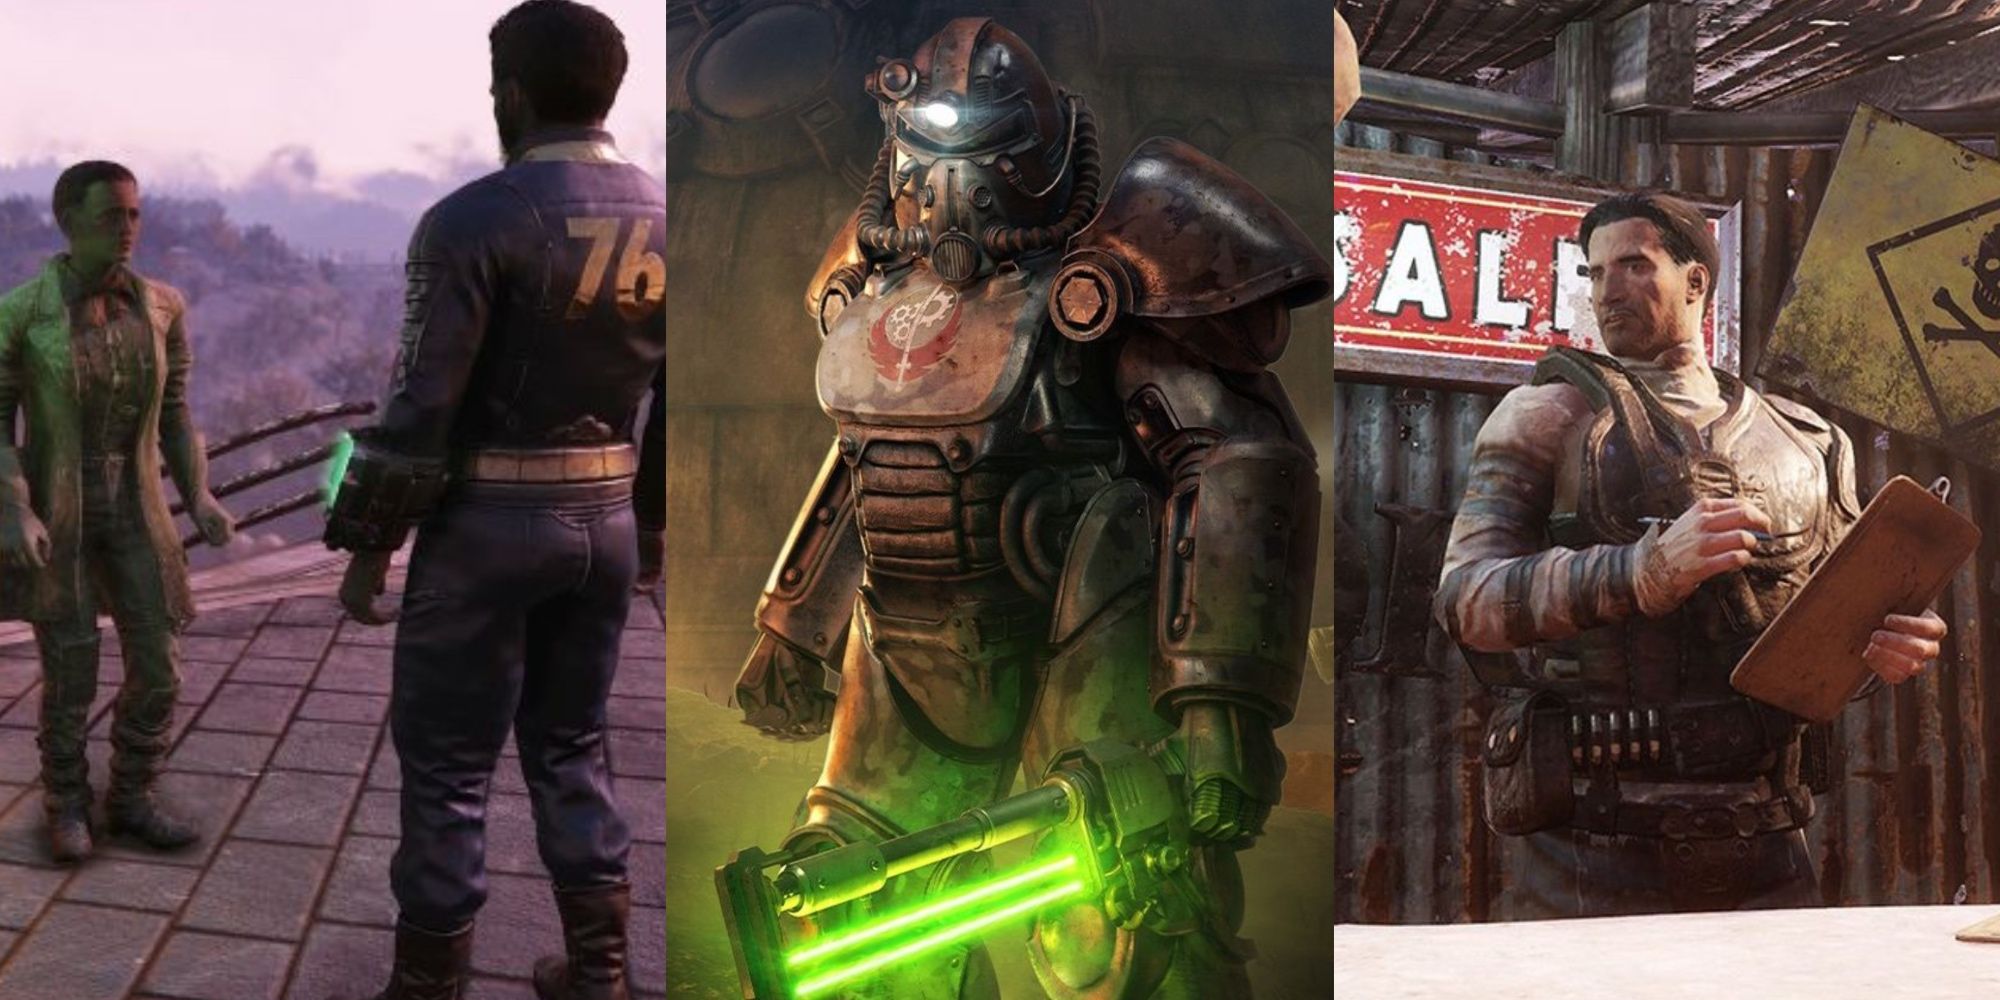 A split image of a Vault Dweller talking, a power-suited Brotherhood of Steel Member, and a merchant in Fallout 76.